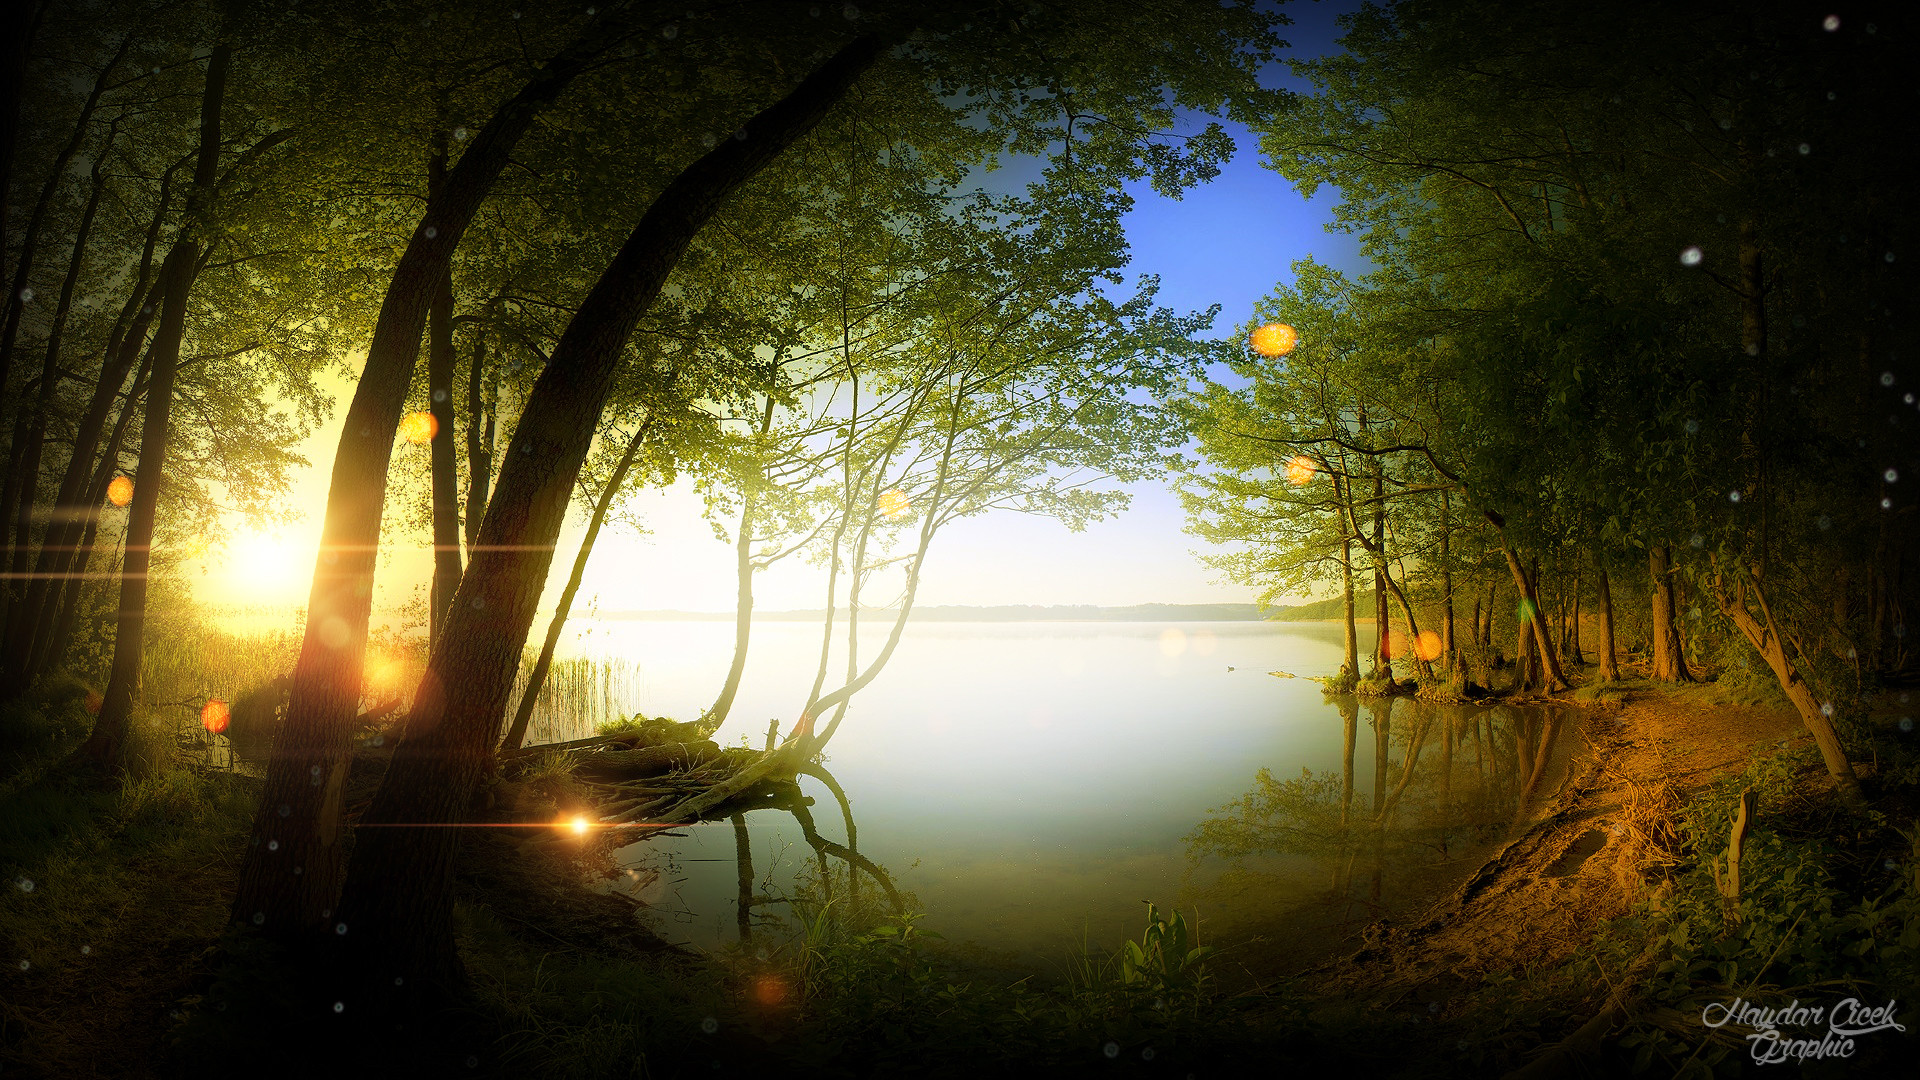 1920x1080 ... Nature Of Shine | 1920 x 1080 HD Wallpaper | HCG by ceveLion